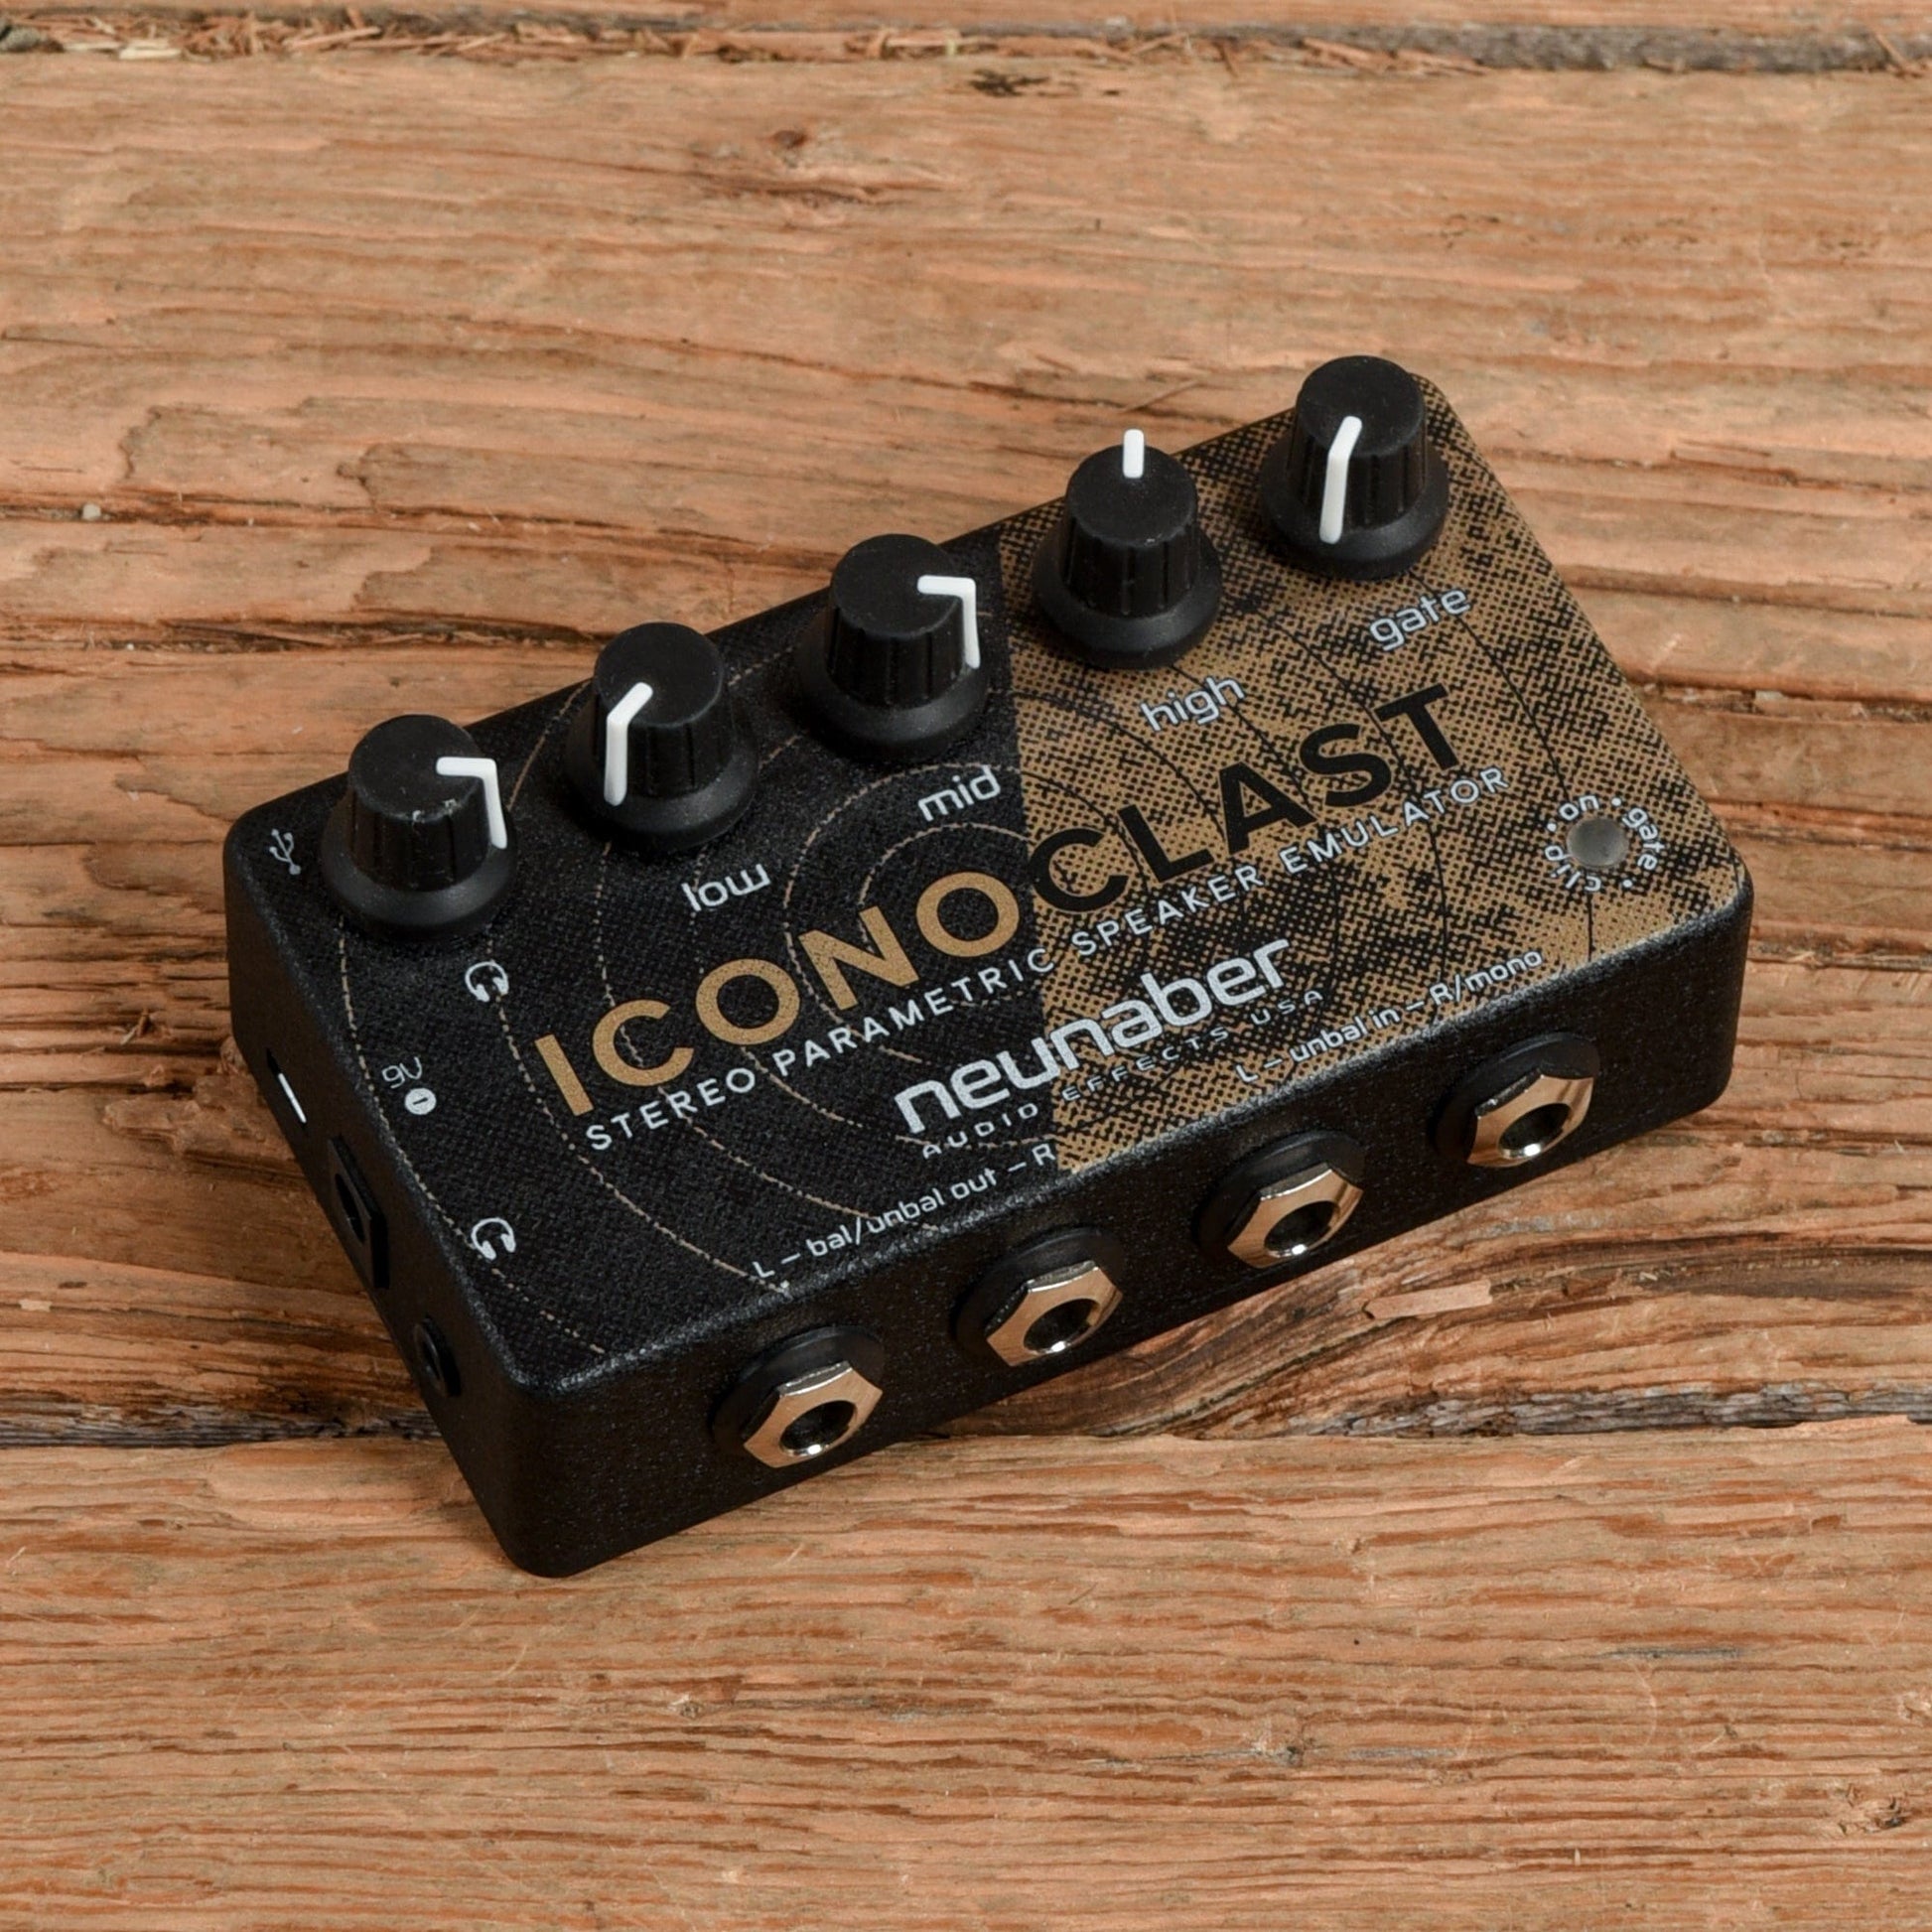 Neunaber Iconoclast Speaker Emulator Effects and Pedals / Cab Sims